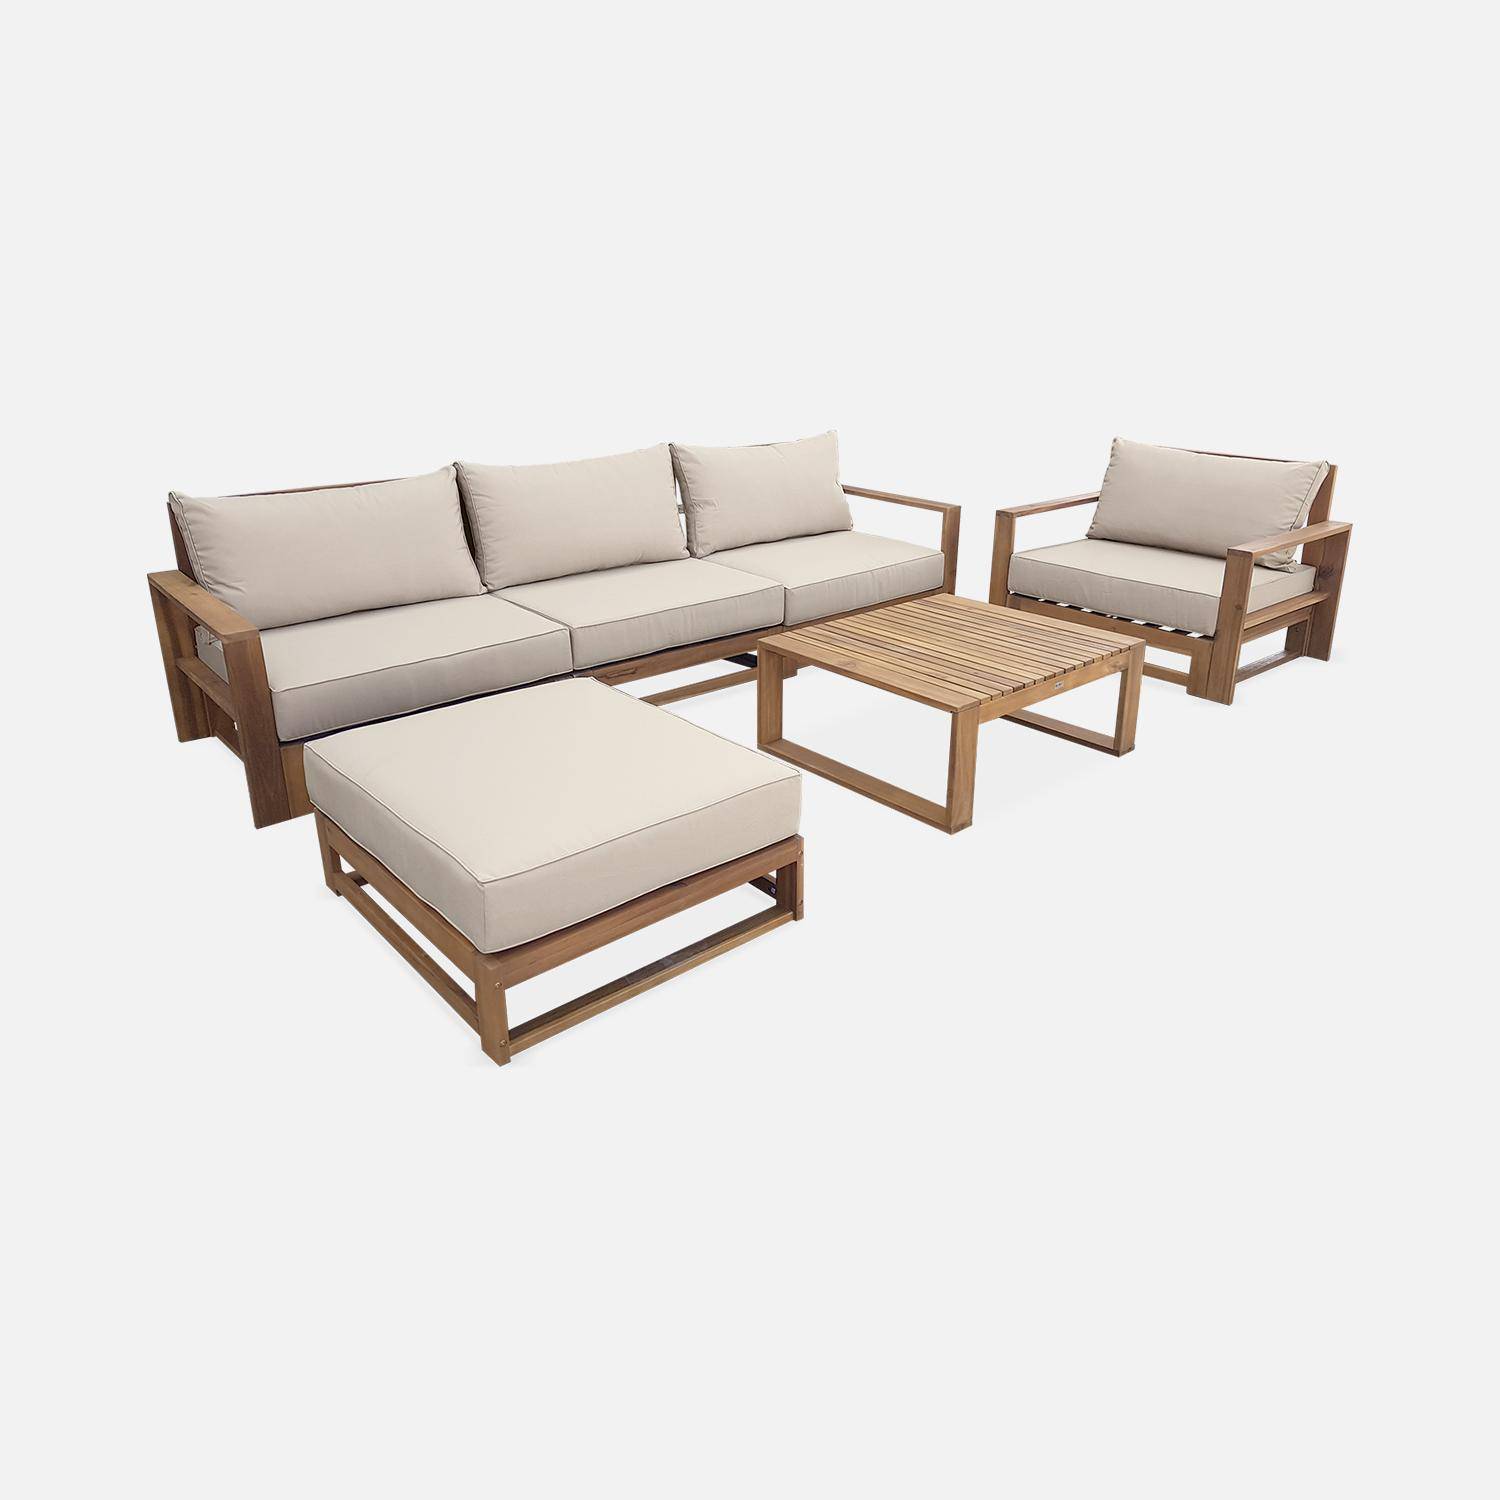 5-seater wooden garden sofa, armchairs and coffee table in acacia wood, Beige, Mendoza Photo2